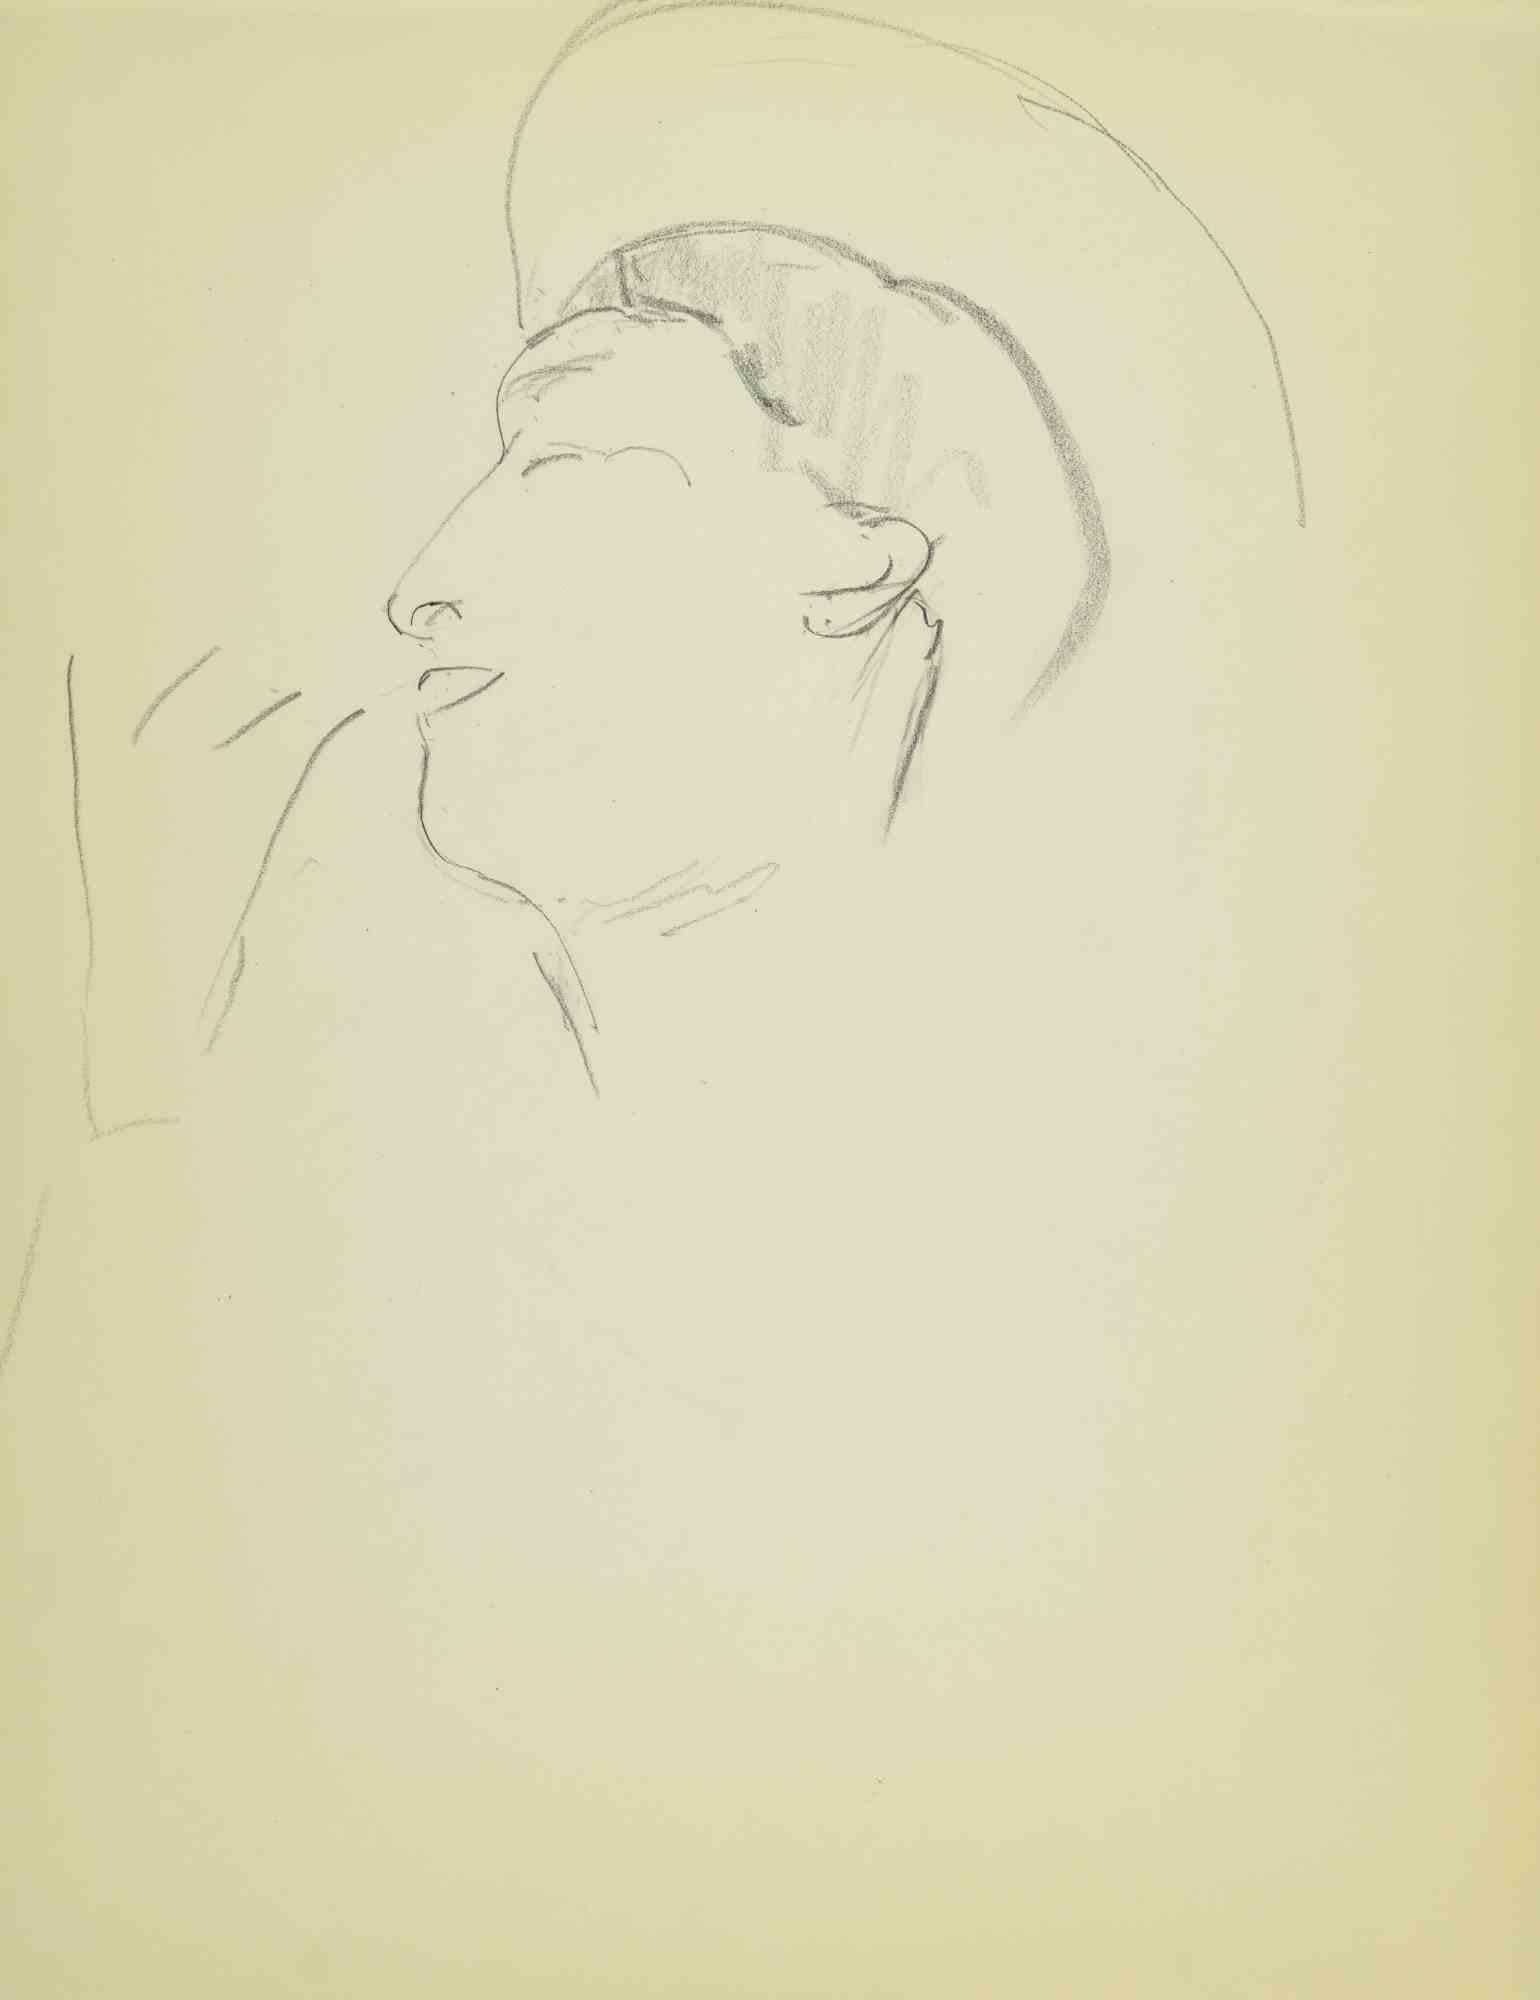 Sketch for a Portrait is an drawing on  paper realized in the Mid-20th Century by Flor David.

Good conditions.

Flor David (1891-1958) ):  pseudonym of David Florence. Pastel painter. He was a pupil of Desirè Lucas. He exhibited at the Salon des